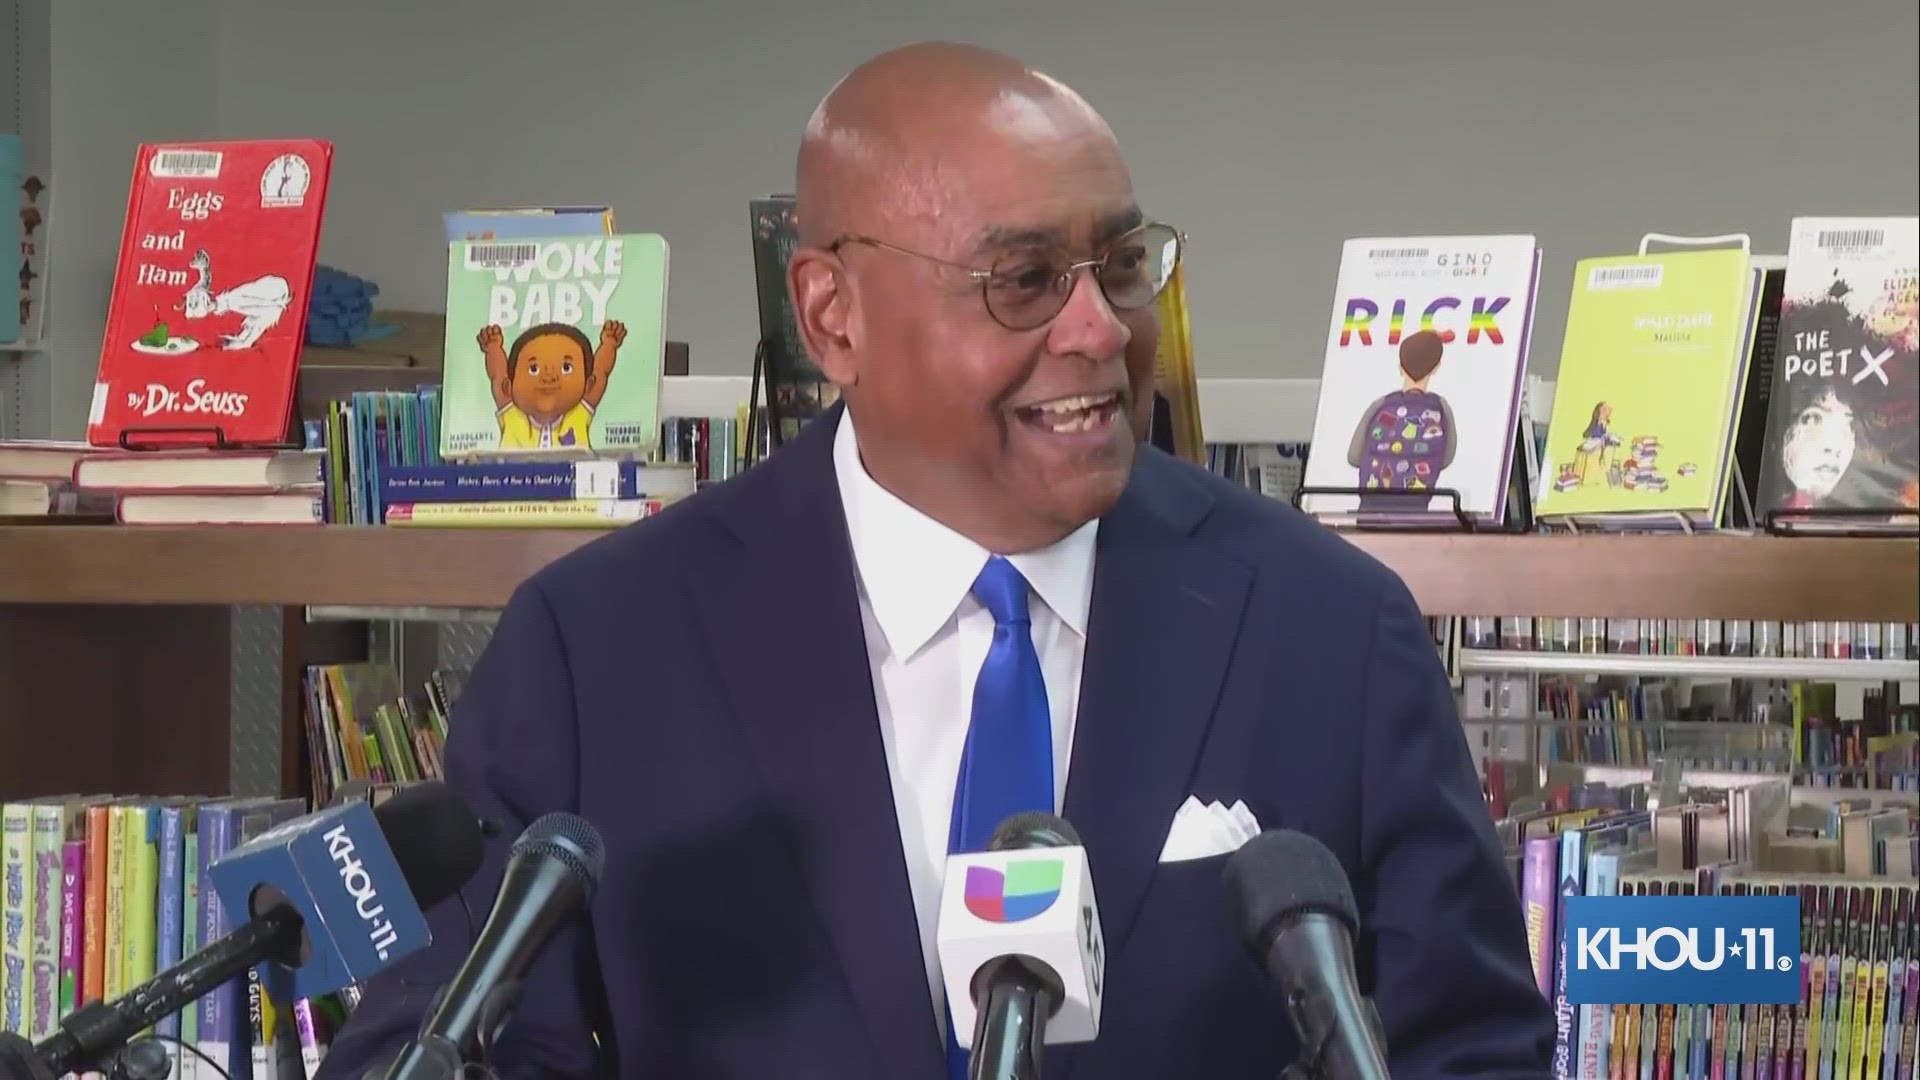 Harris County officials held a press conference Monday morning in honor of Banned Book Week.